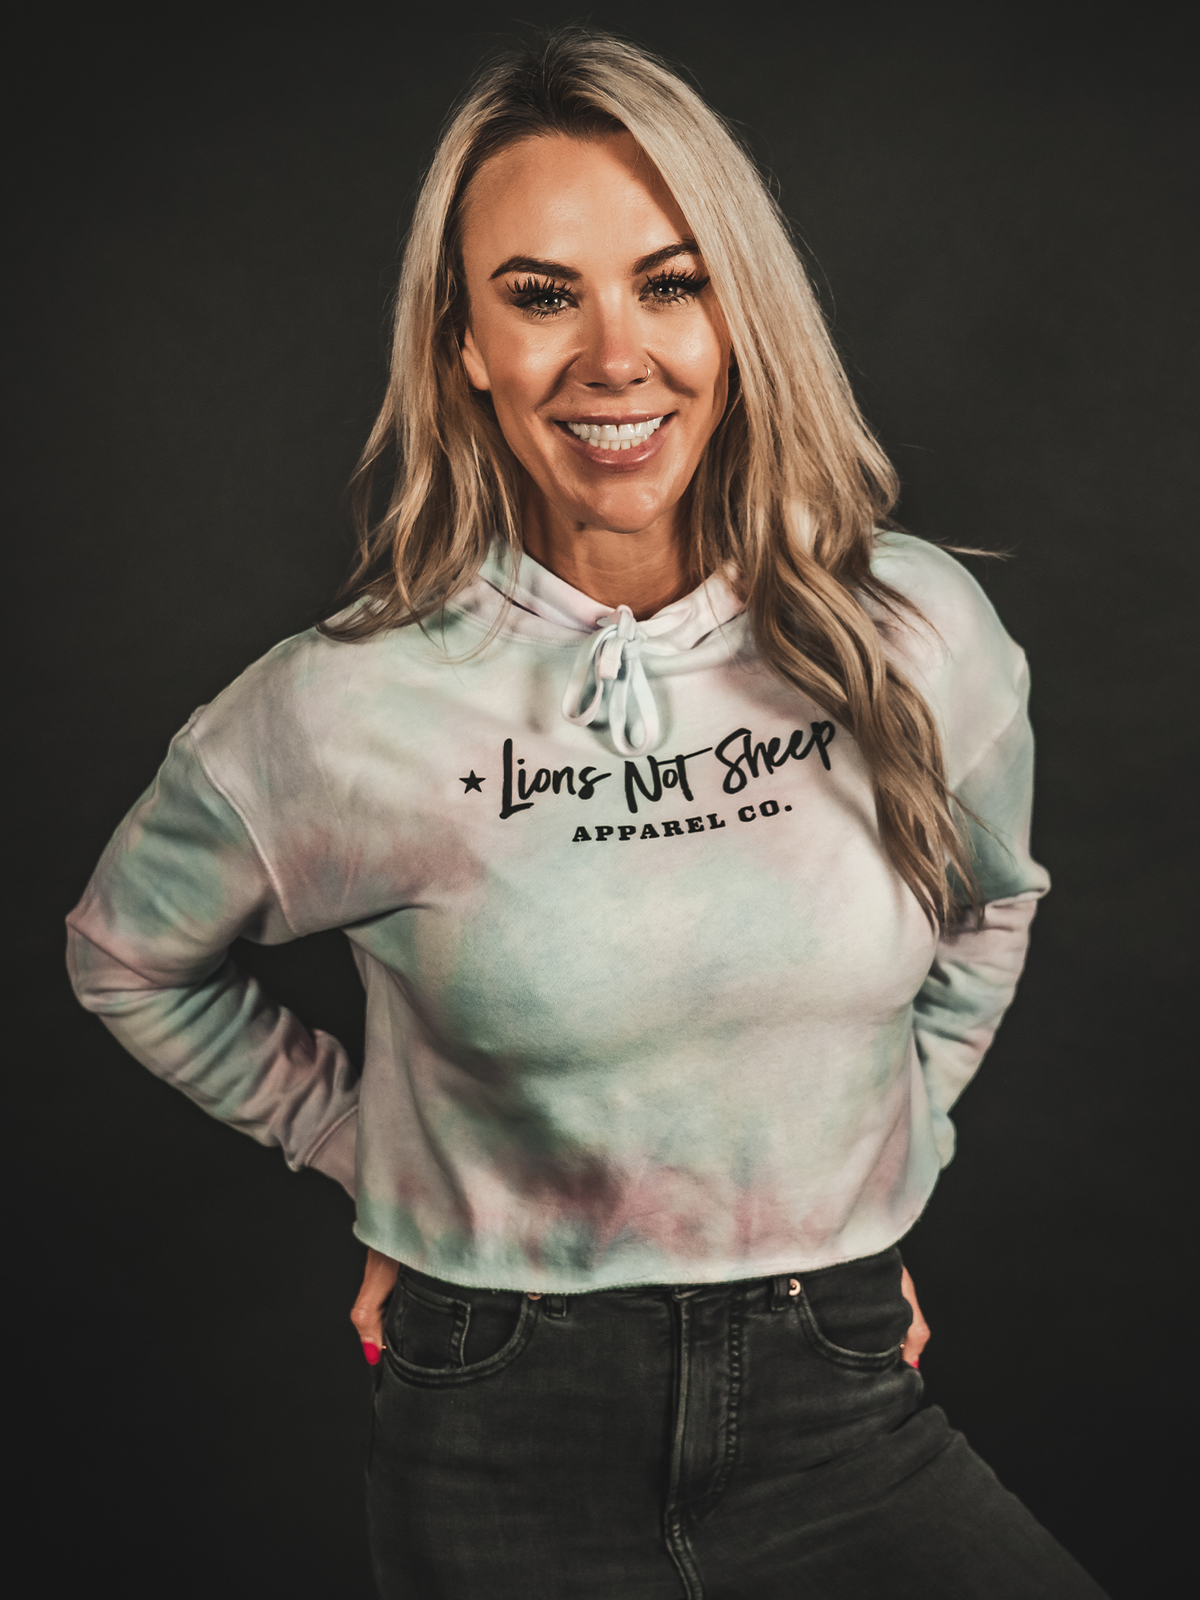 LIONS NOT SHEEP APPAREL CO. Womens Crop Top Hoodie (LIMITED EDITION) - Lions Not Sheep ®